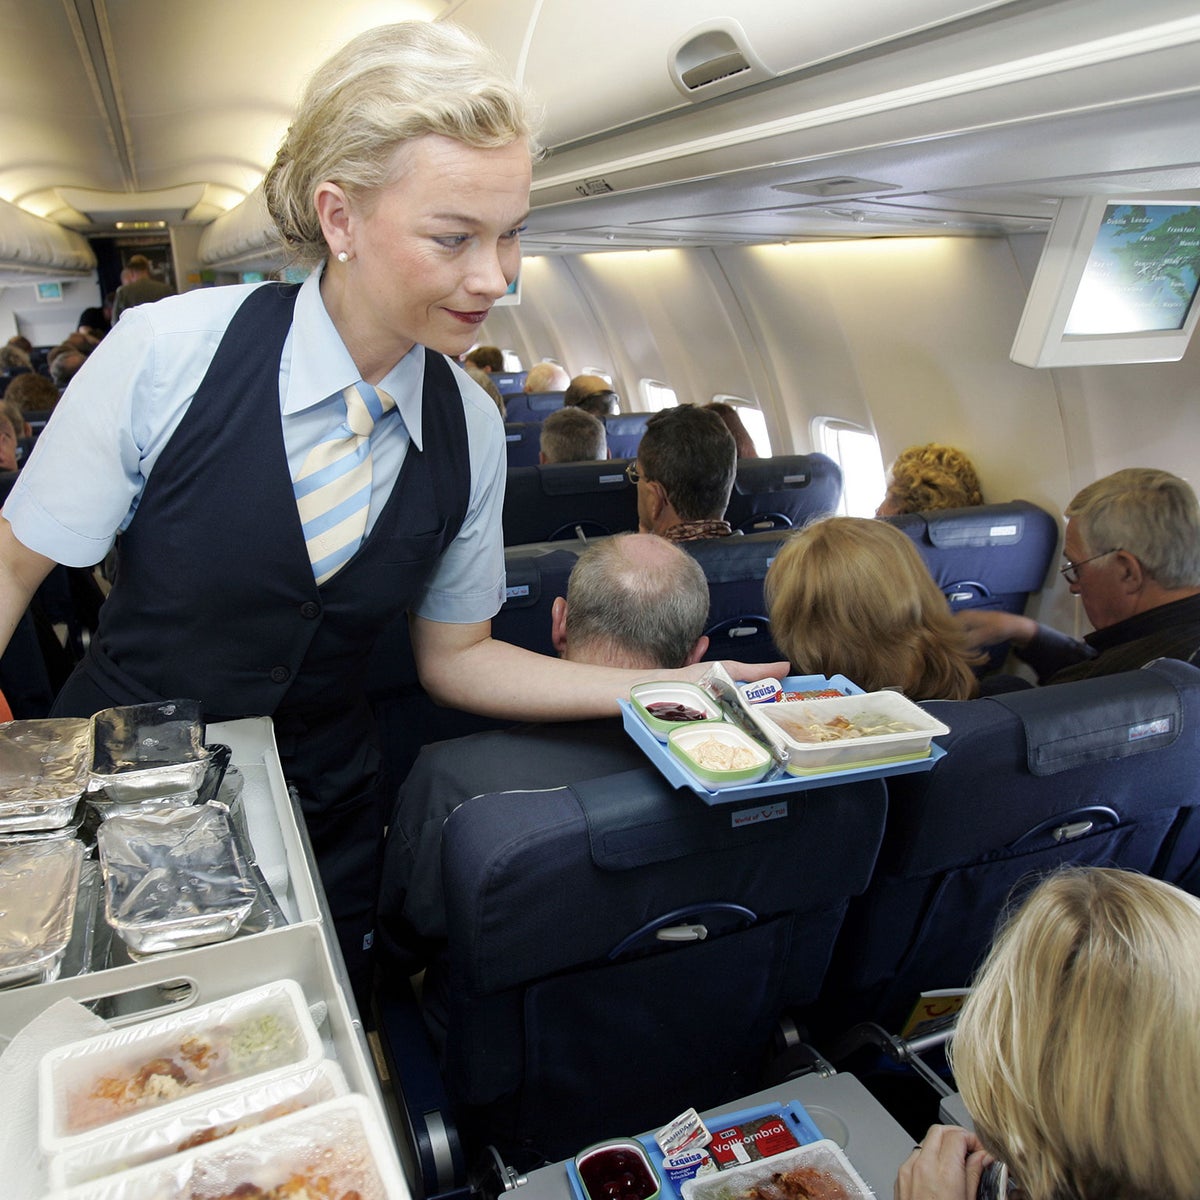 10 Things You're Doing That Annoy Flight Attendants